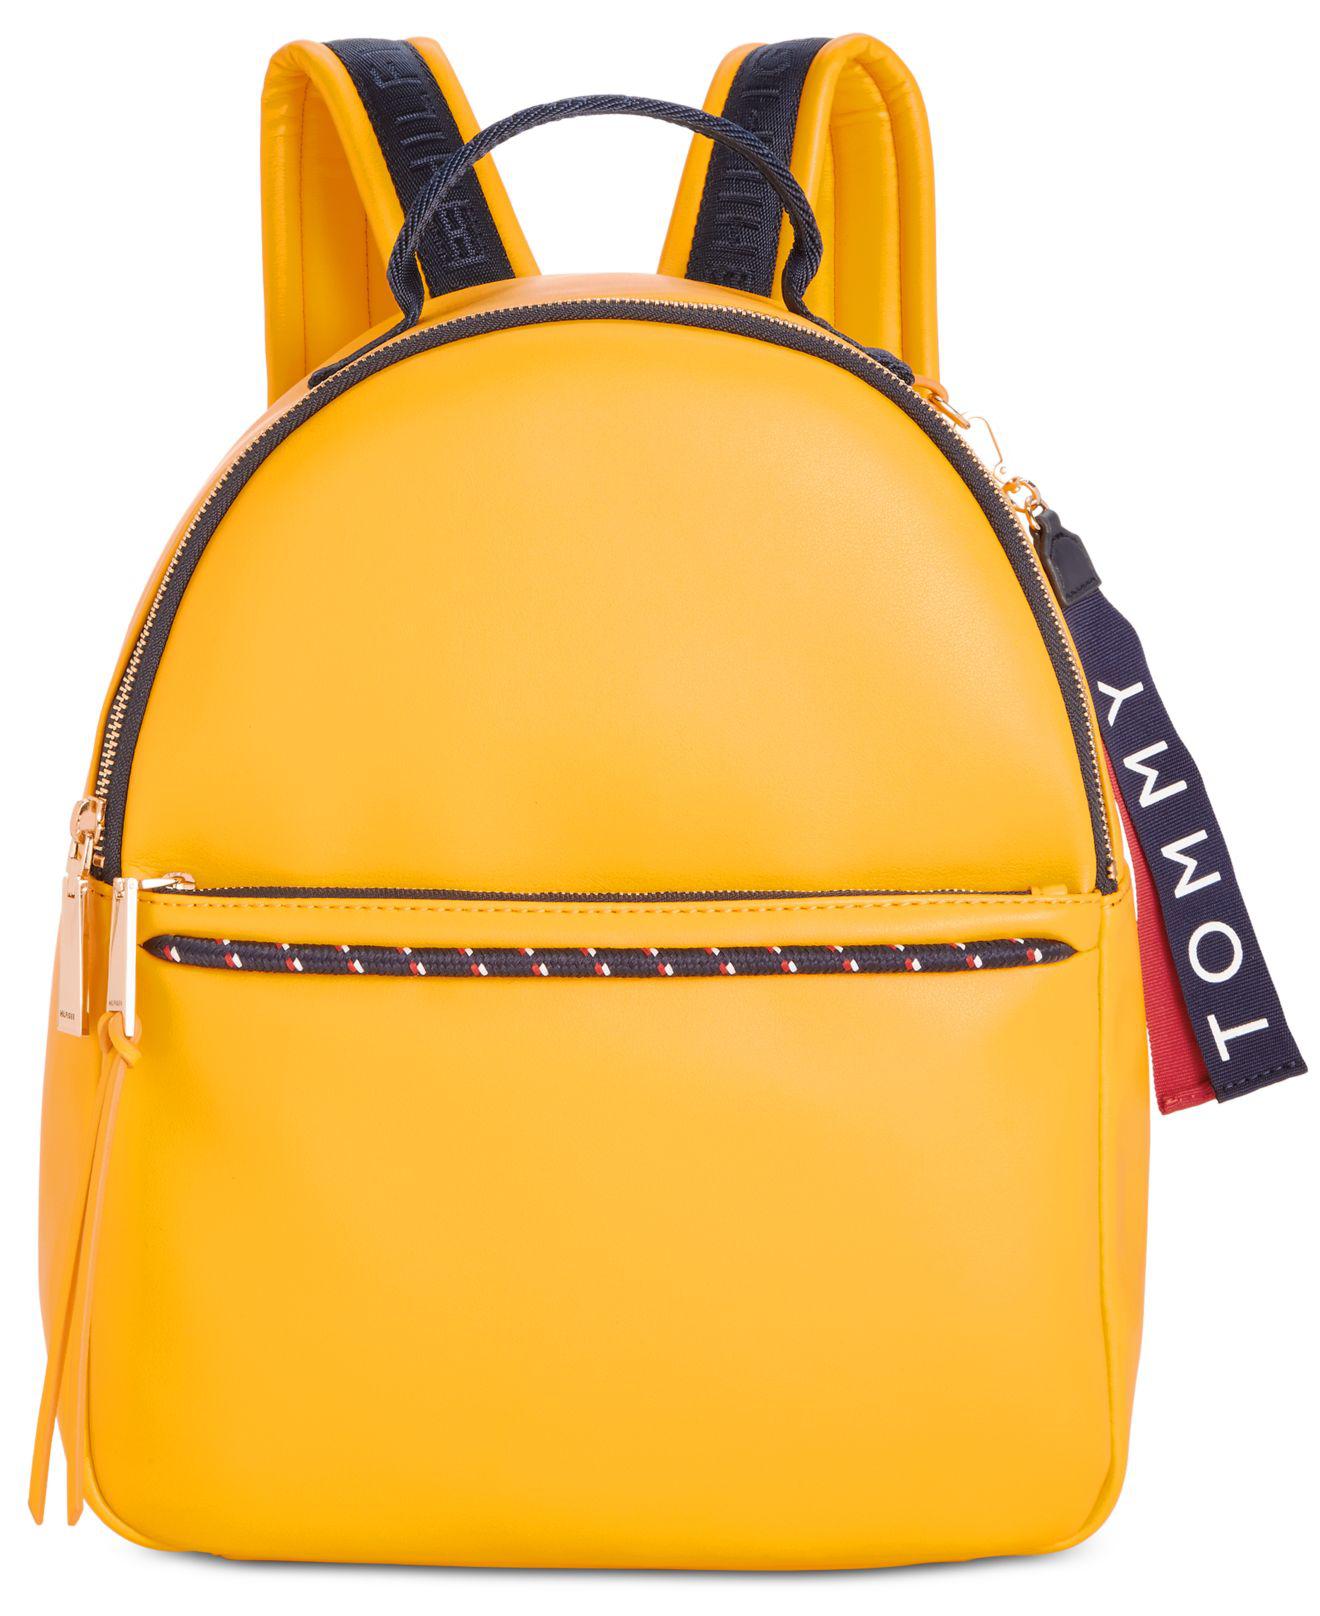 Tommy Hilfiger Devon Backpack in Yellow 